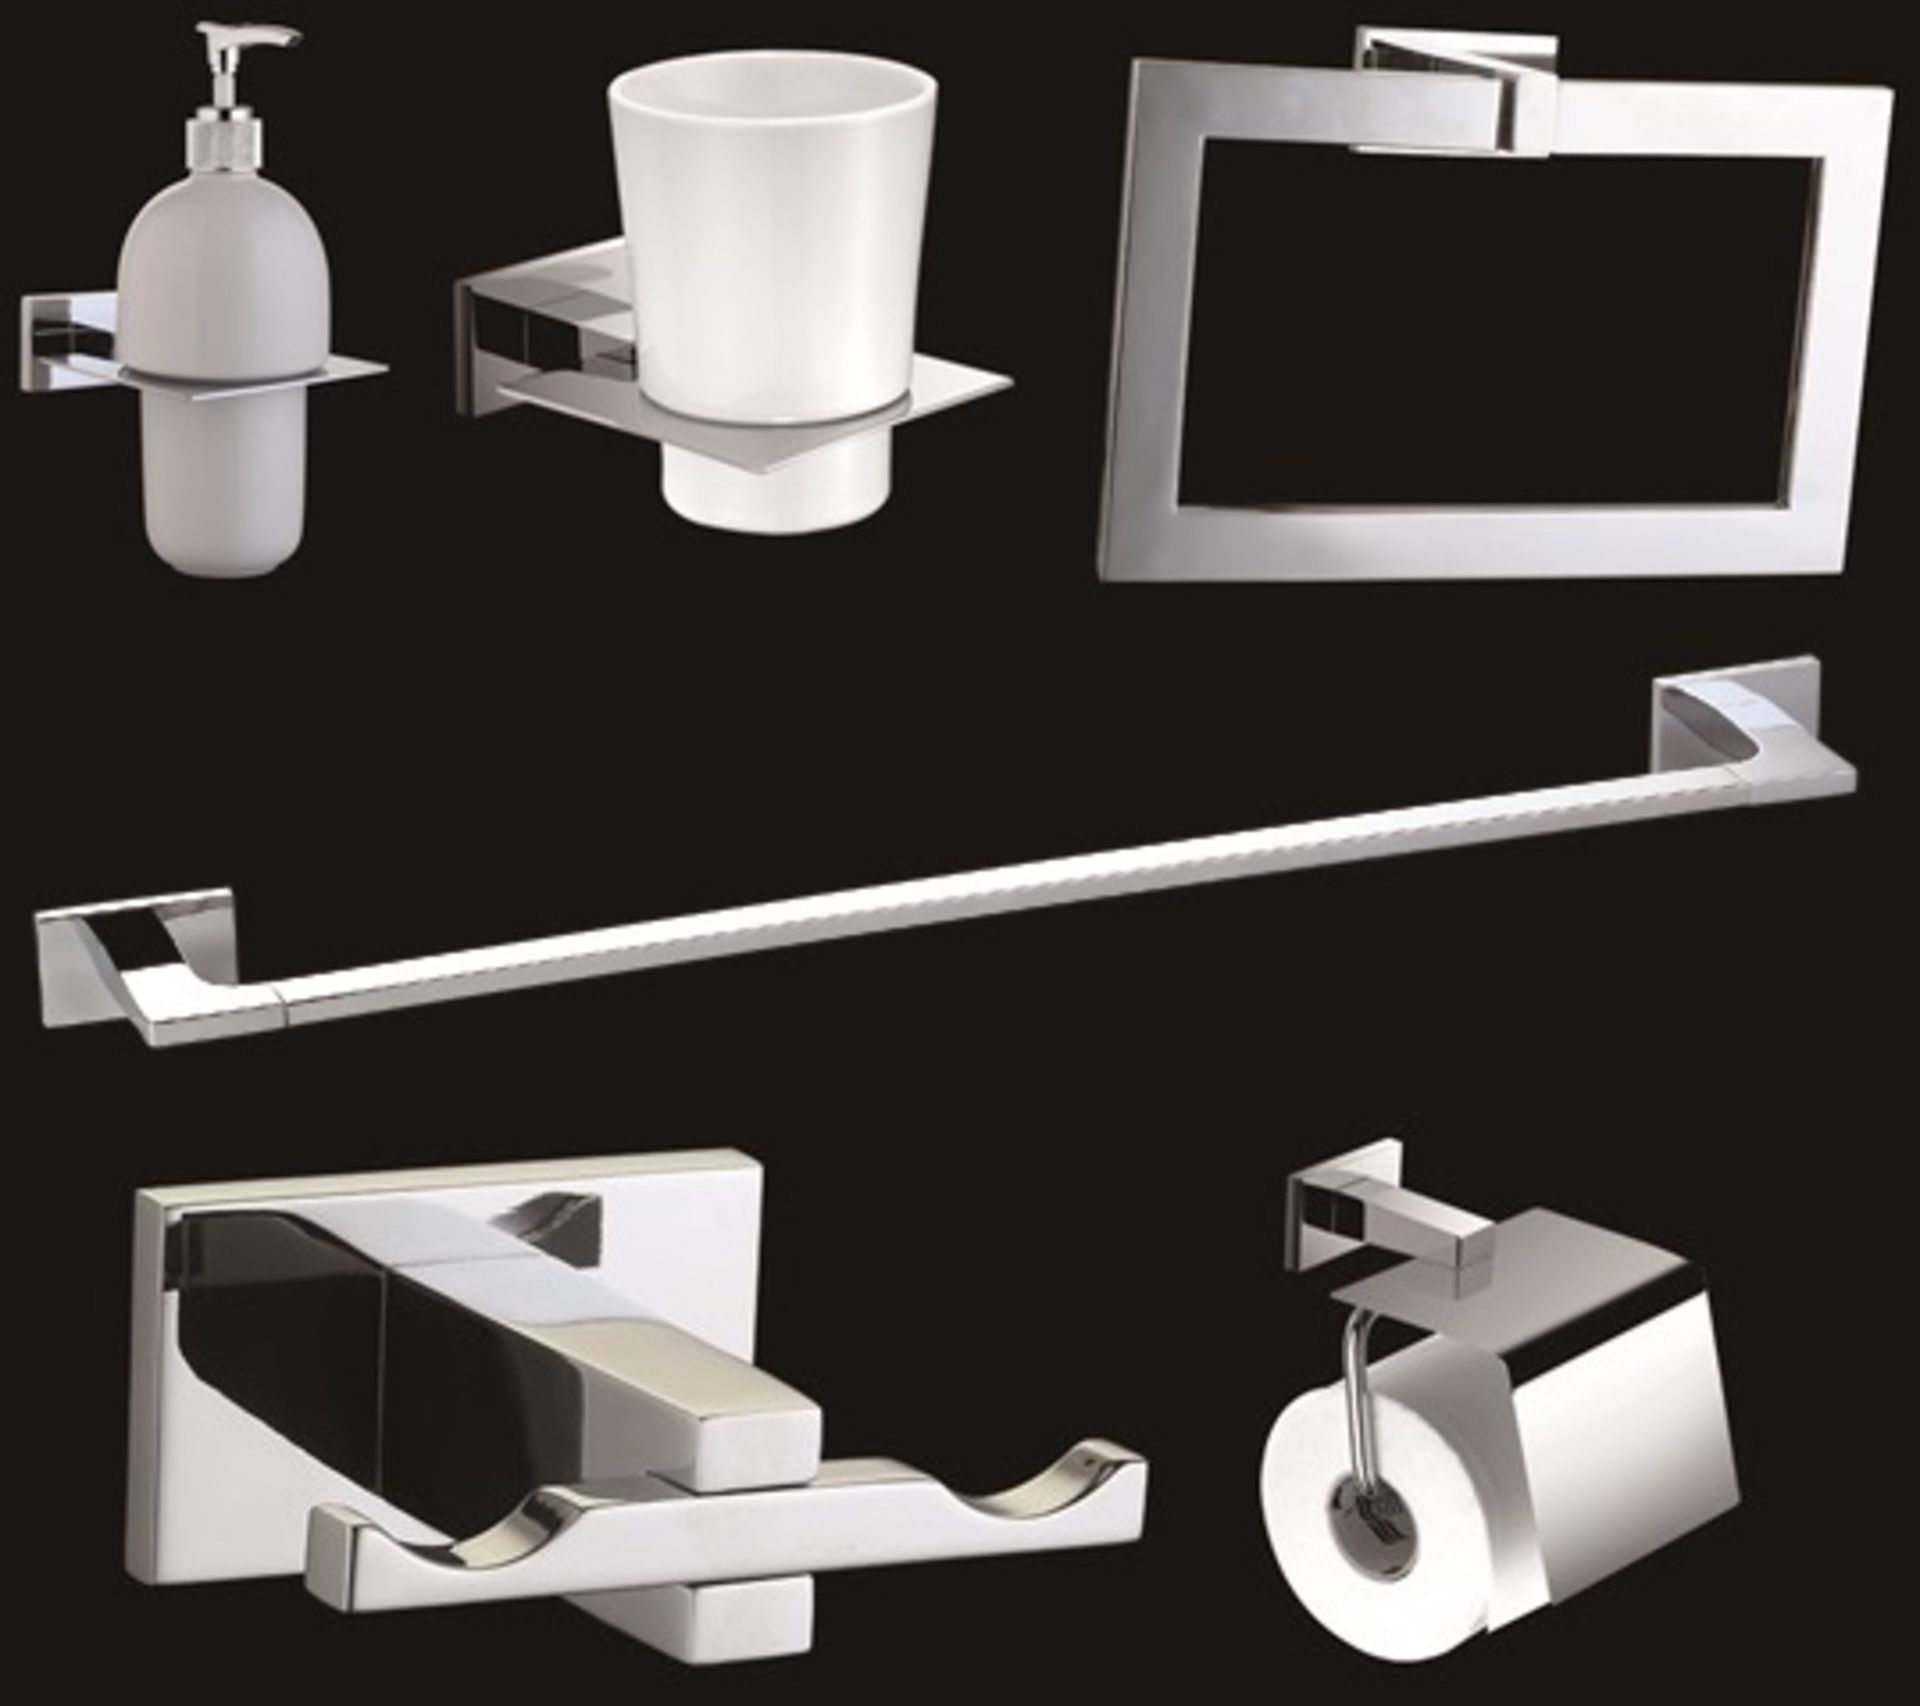 1 x Vogue Series 6 Six Piece Bathroom Accessory Set - Includes WC Roll Holder, Soap Dispenser, - Image 3 of 12